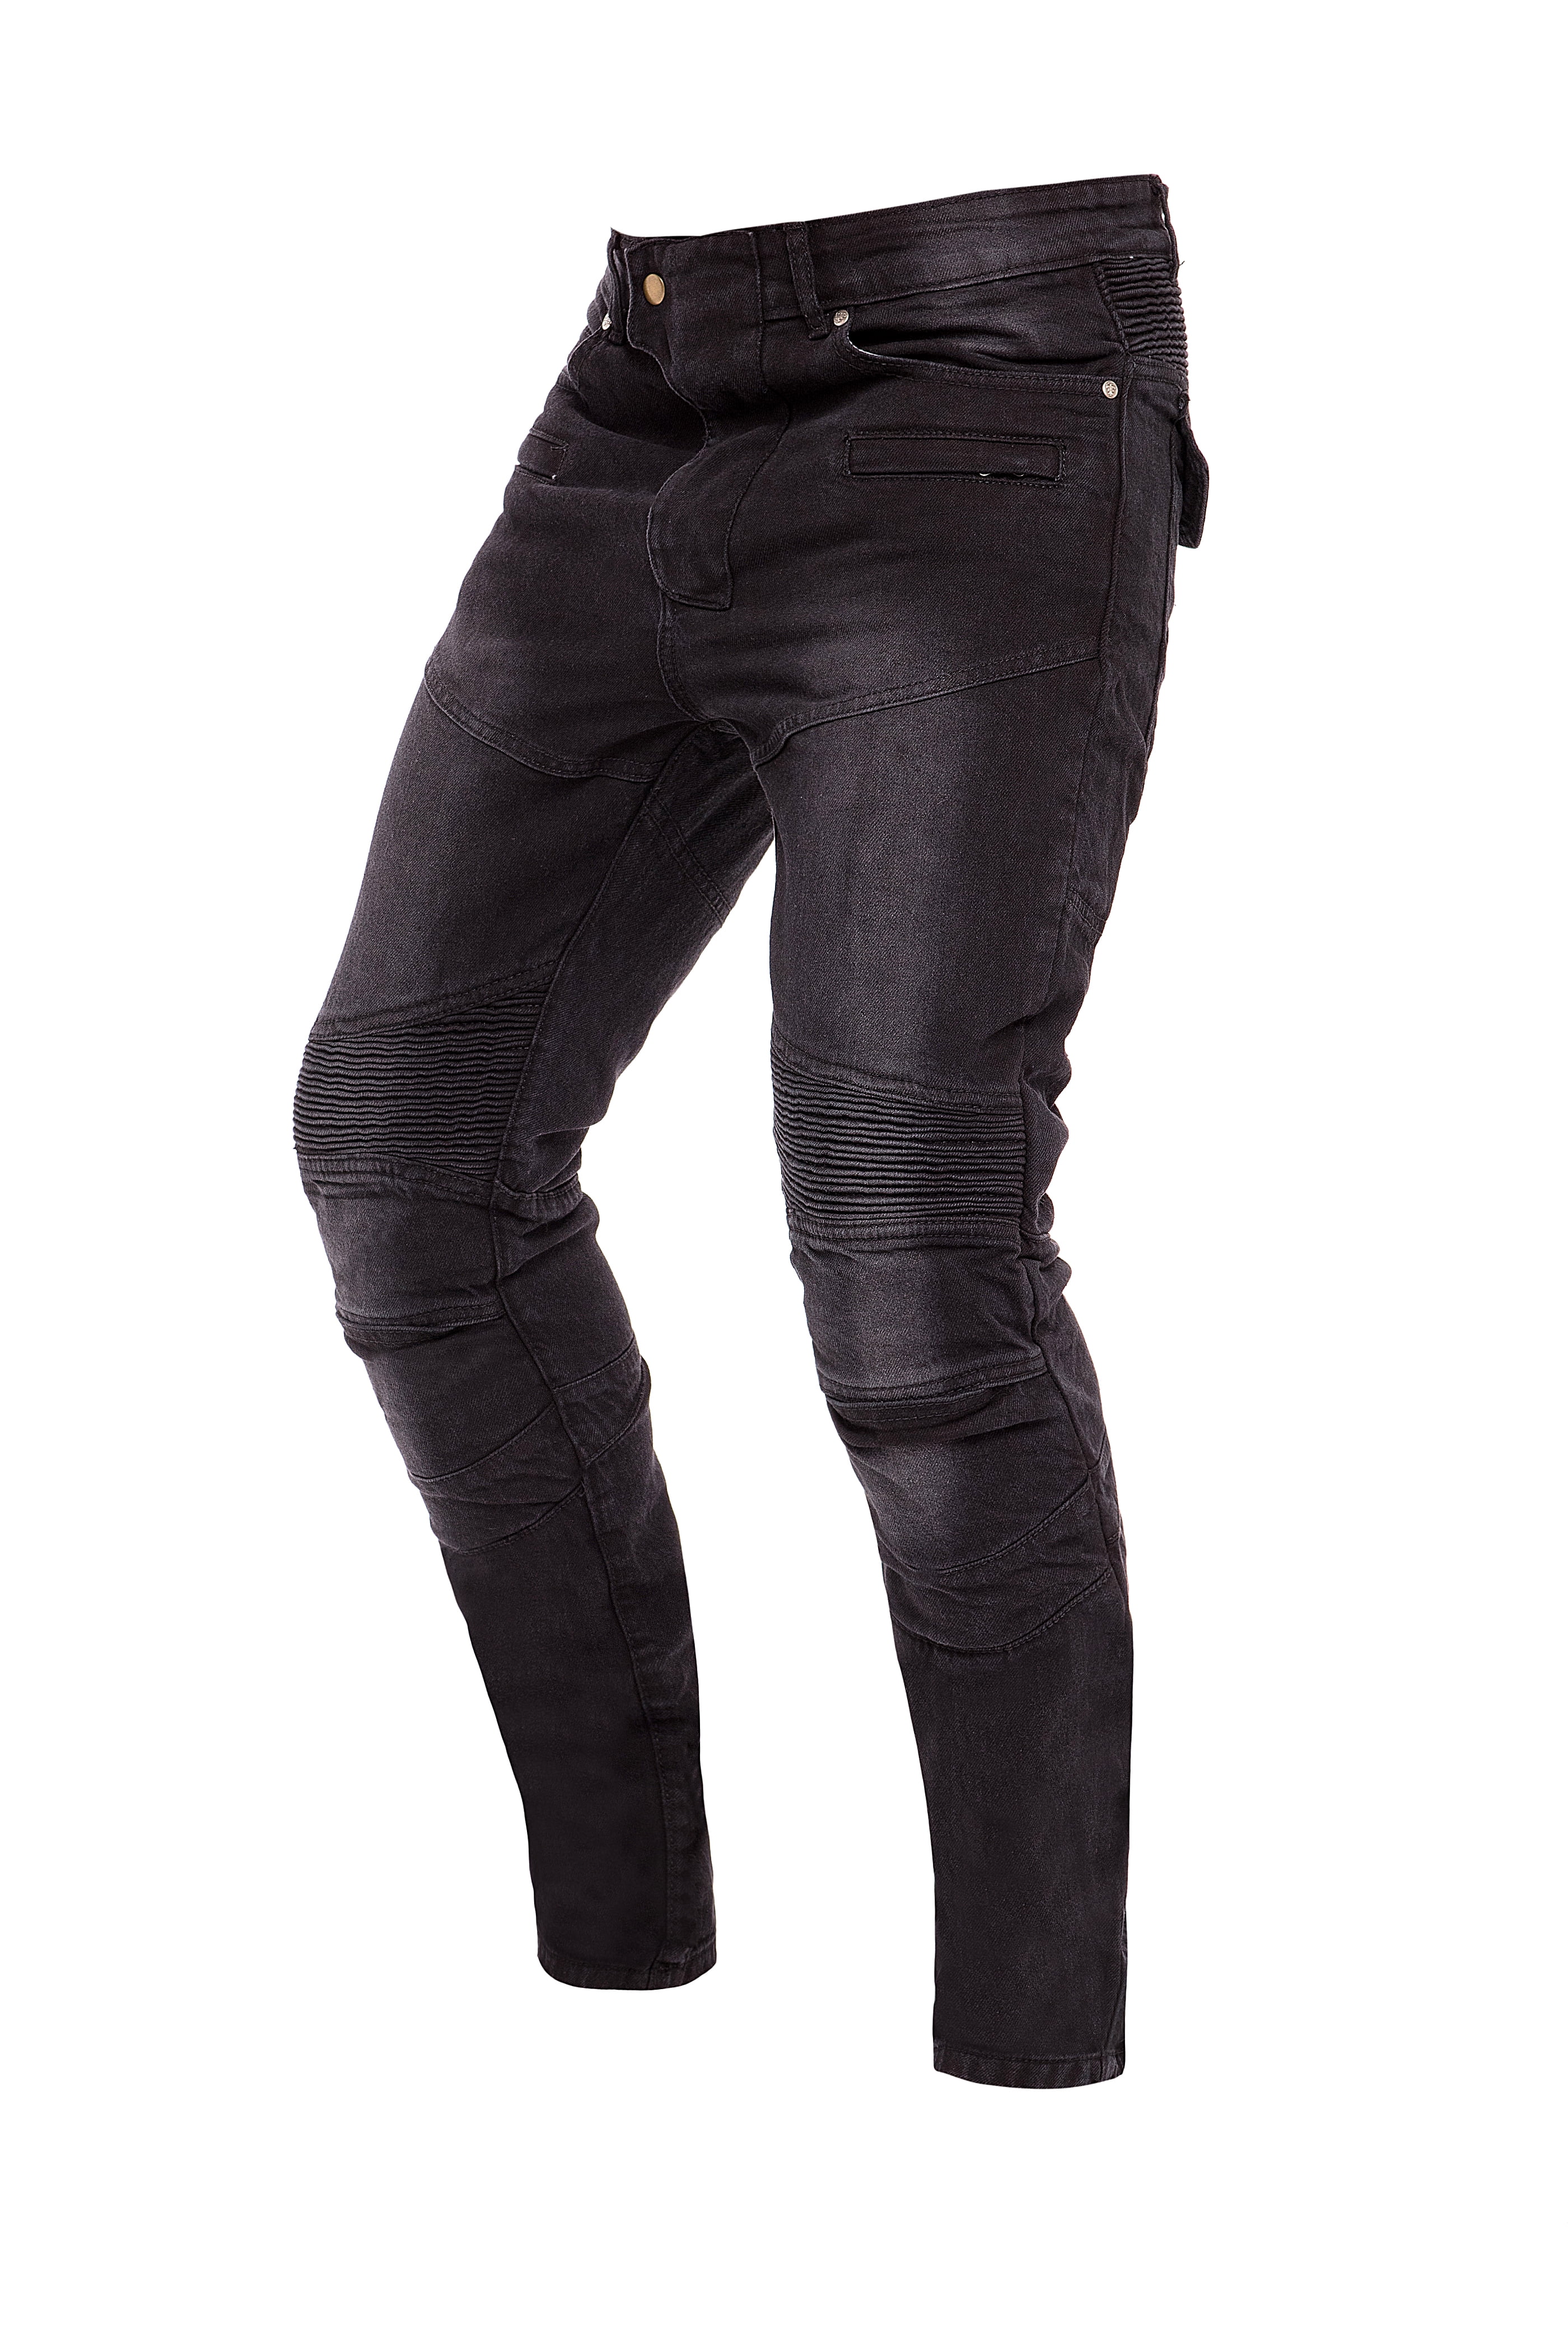 Jeans Women Pants Lady Motorcycle Guards Homologated Reinforced Aramid Black 